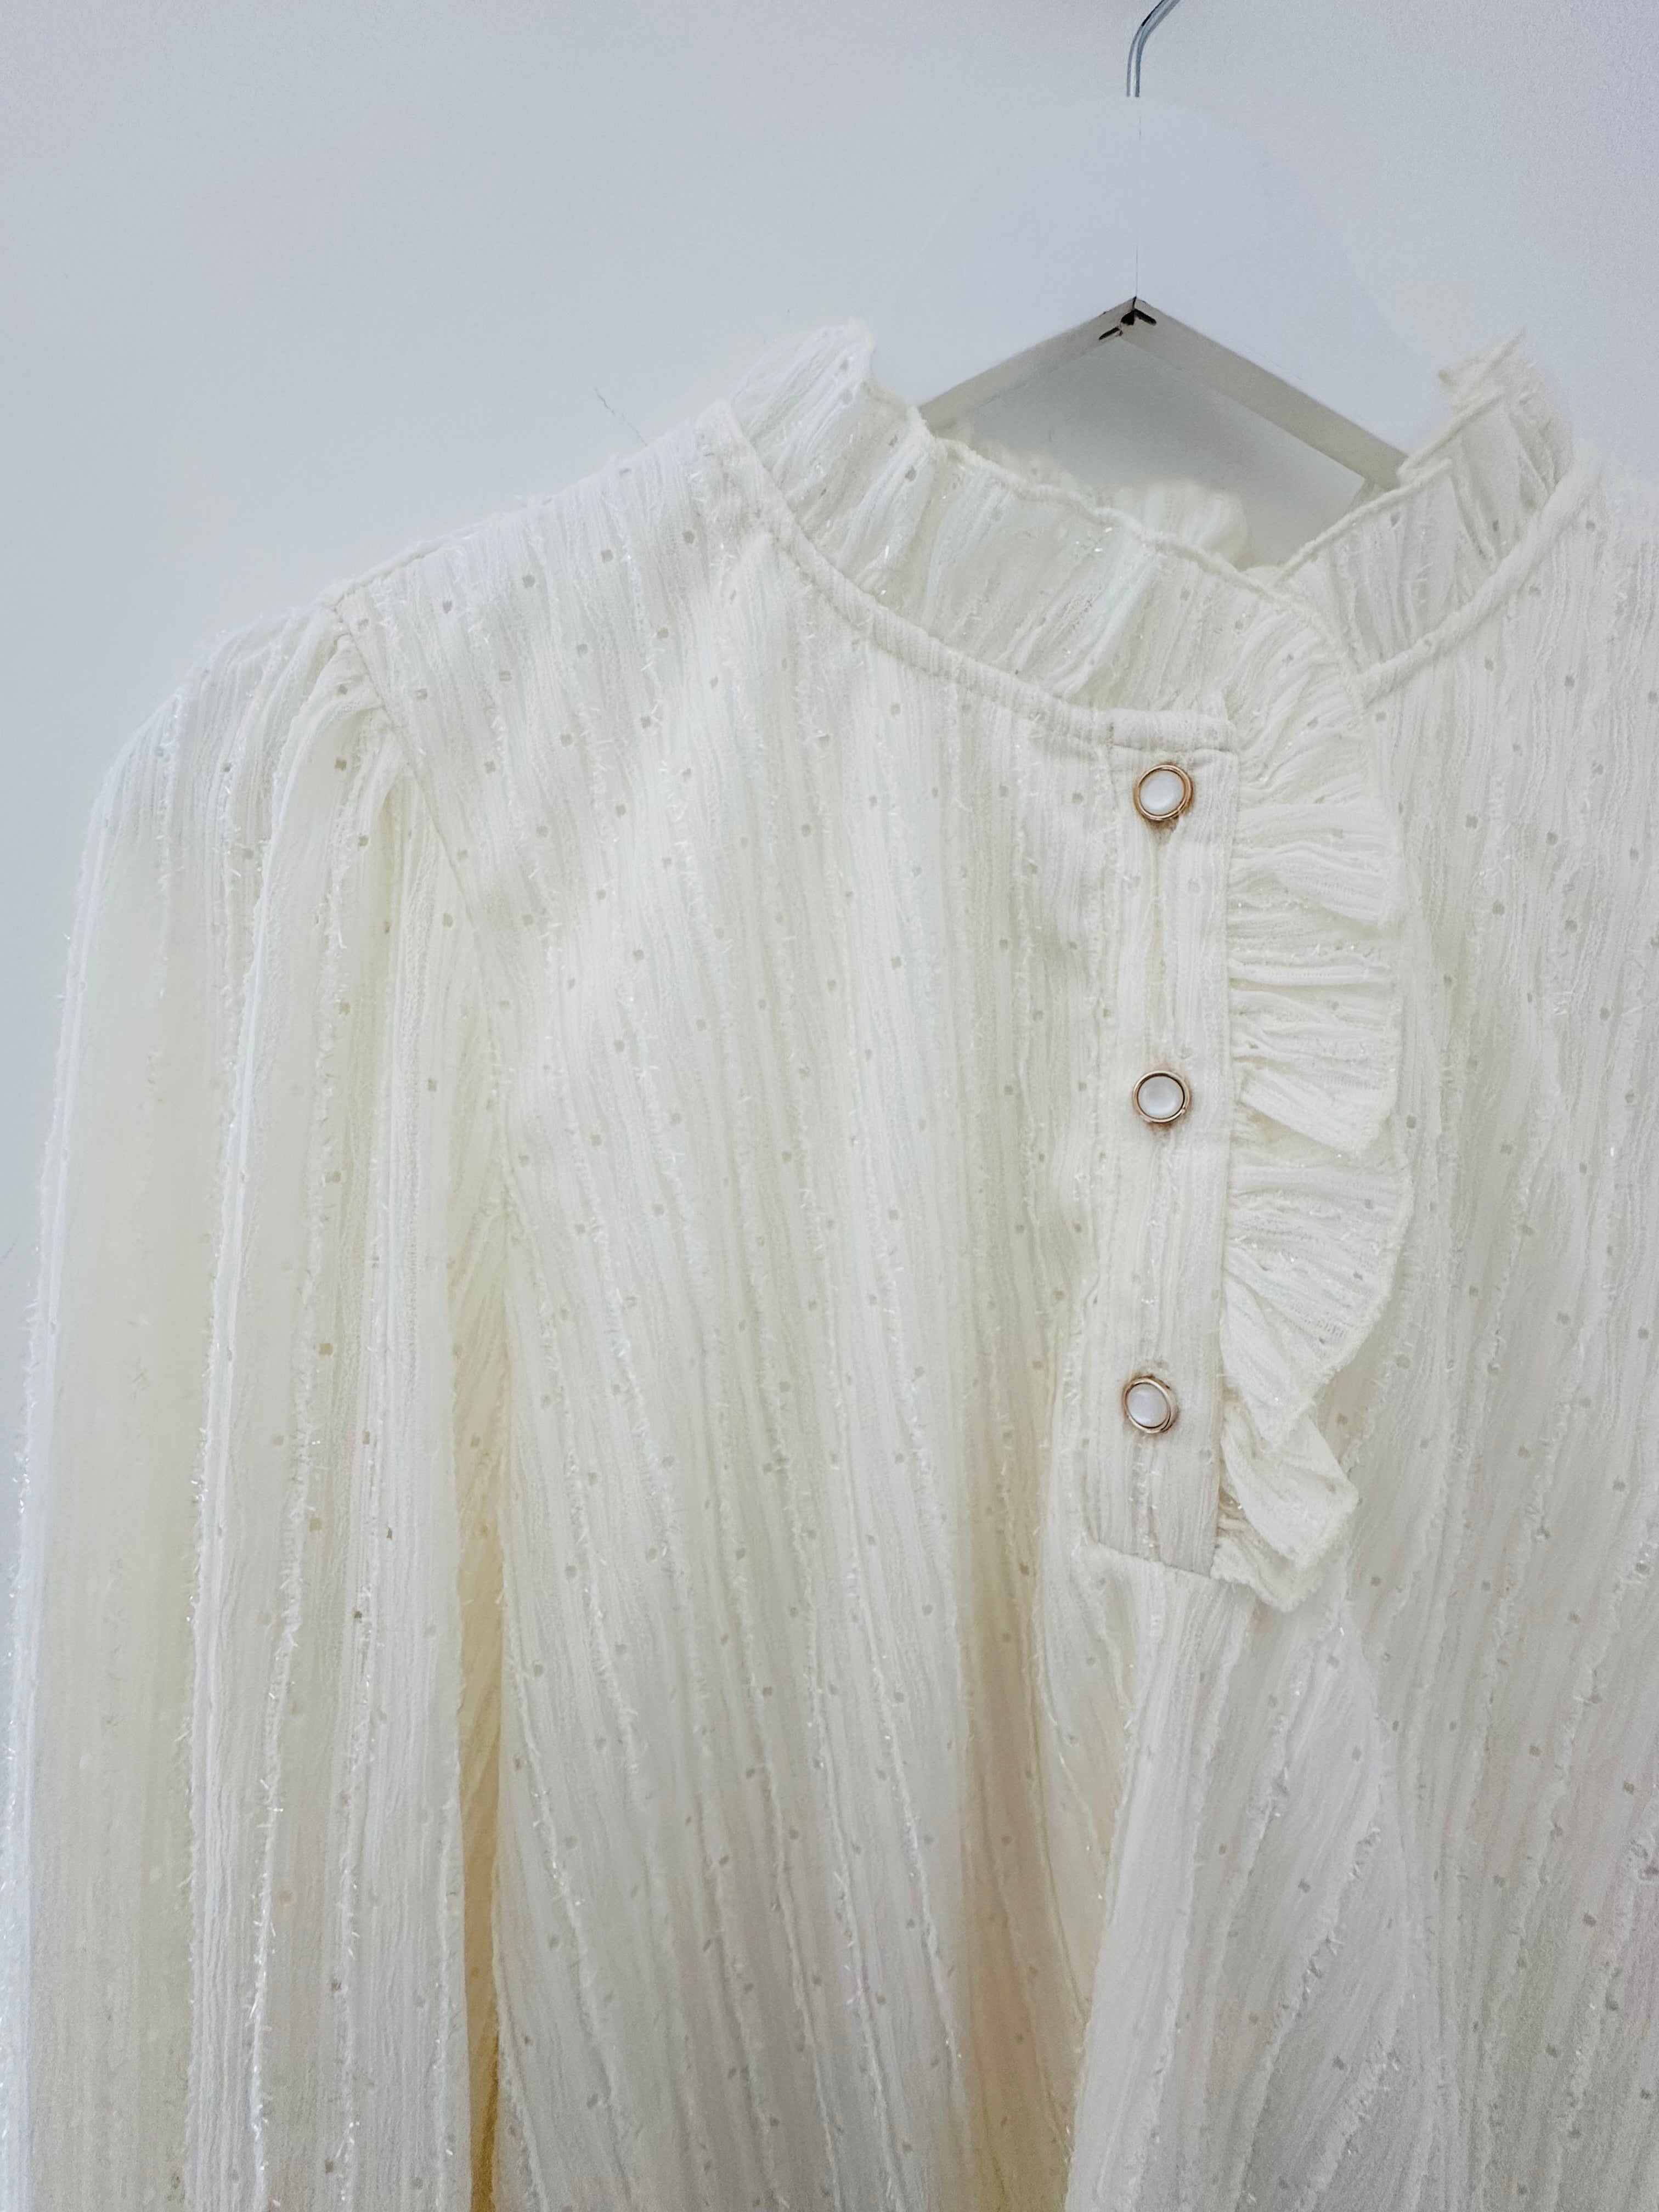 Shimmer Blouse with Ruffle Collar in Vanilla